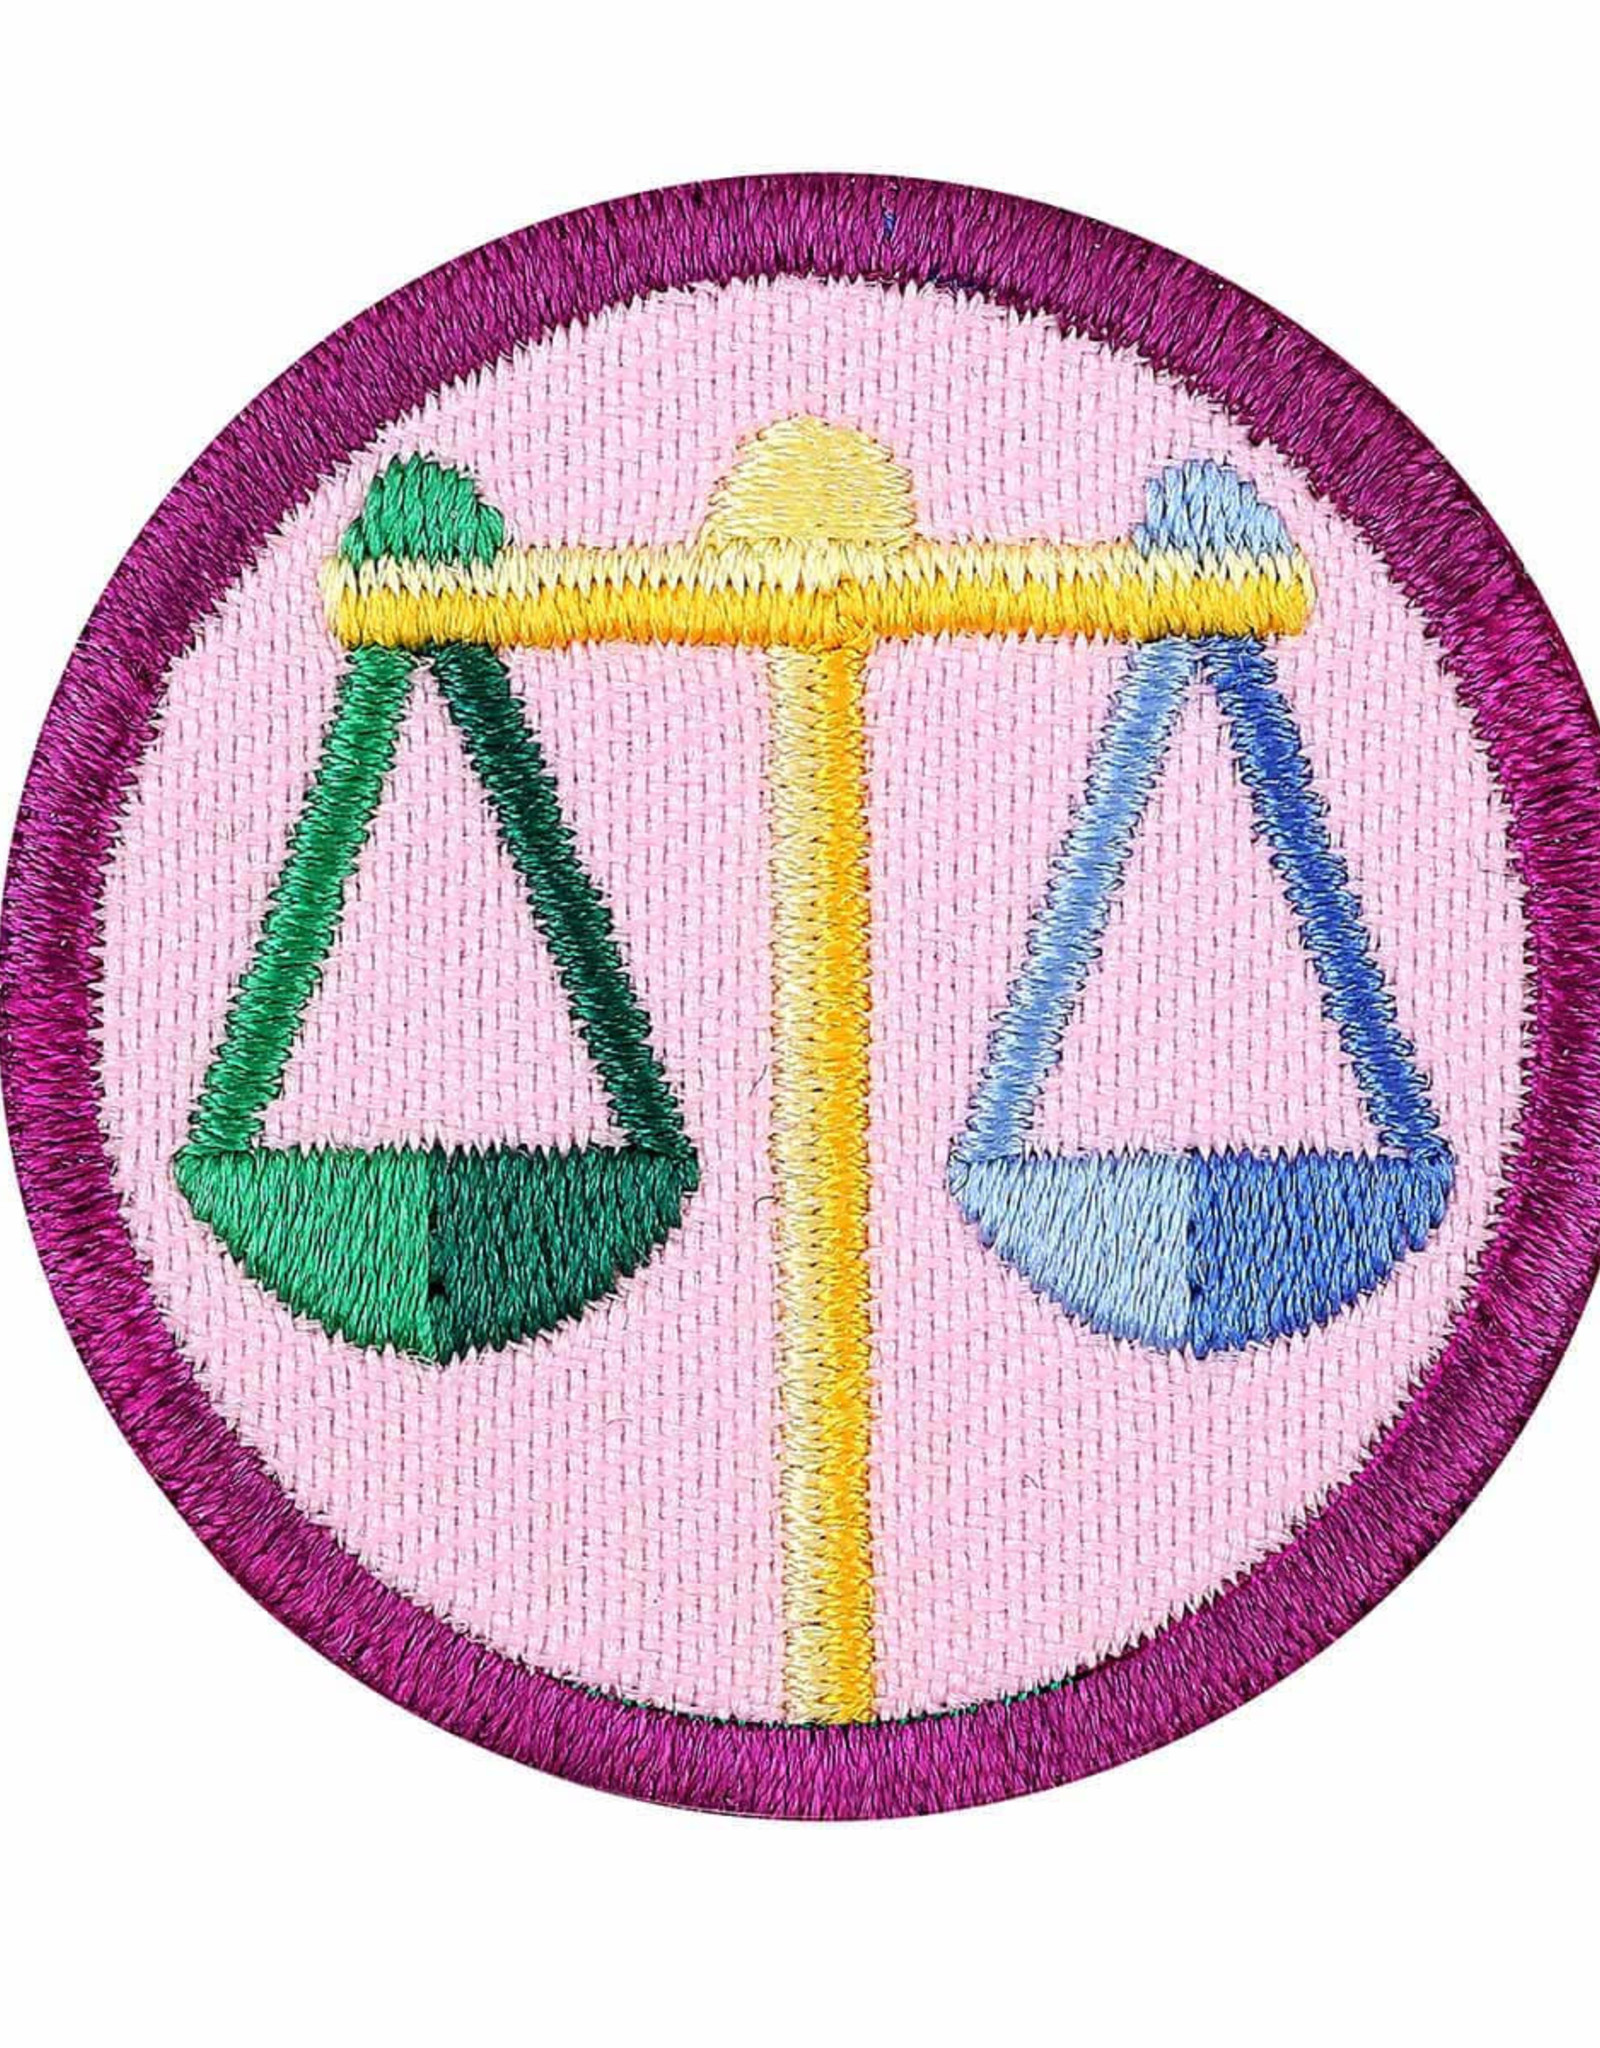 GIRL SCOUTS OF THE USA Democracy for Juniors Badge